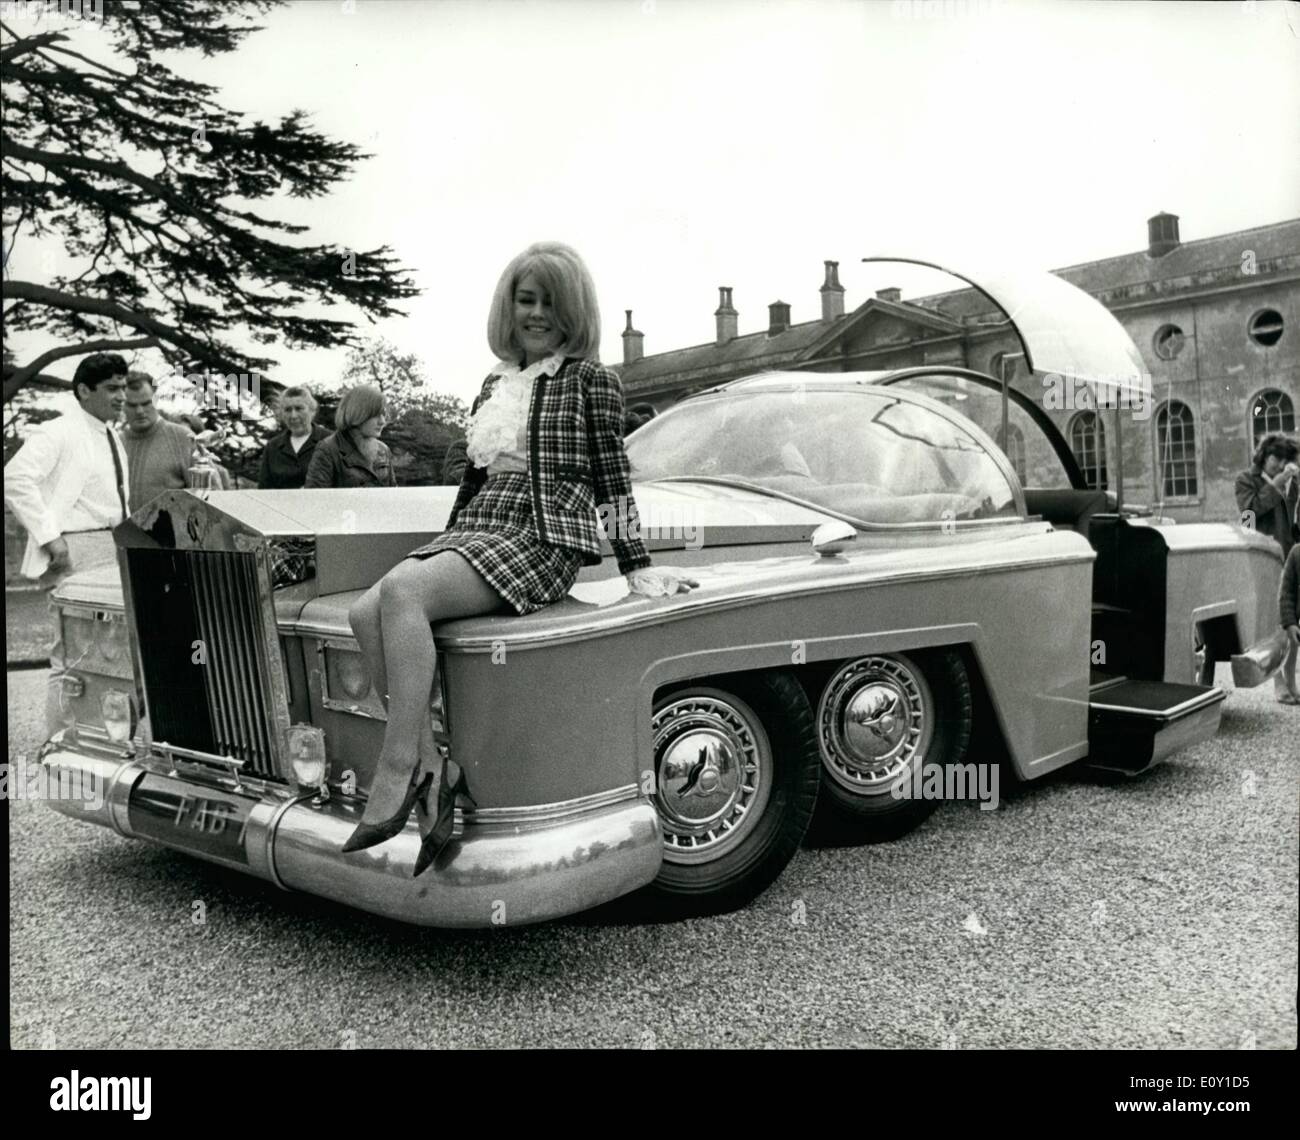 May 05, 1968 - The World's Biggest And Most Expensive Car Fabulous Fab One: The biggest most expensive and most futuristic cairn the world was unveiled at reception today at the Duke of Bad ford's home Woburn Abby, Beds. The car, Fab One, is a full size, fully Operational version of the pink limousine used by the TV Puppet heroine lady Penelopa in Garry Anderson's series 'Thunderbird's' and in his United Artists feature film 'Thunderbird Six' Fab one weighs more than the tone is eight feet wide and twenty two feet six inch long, contain its own and computer, closed circuit T.V Stock Photo